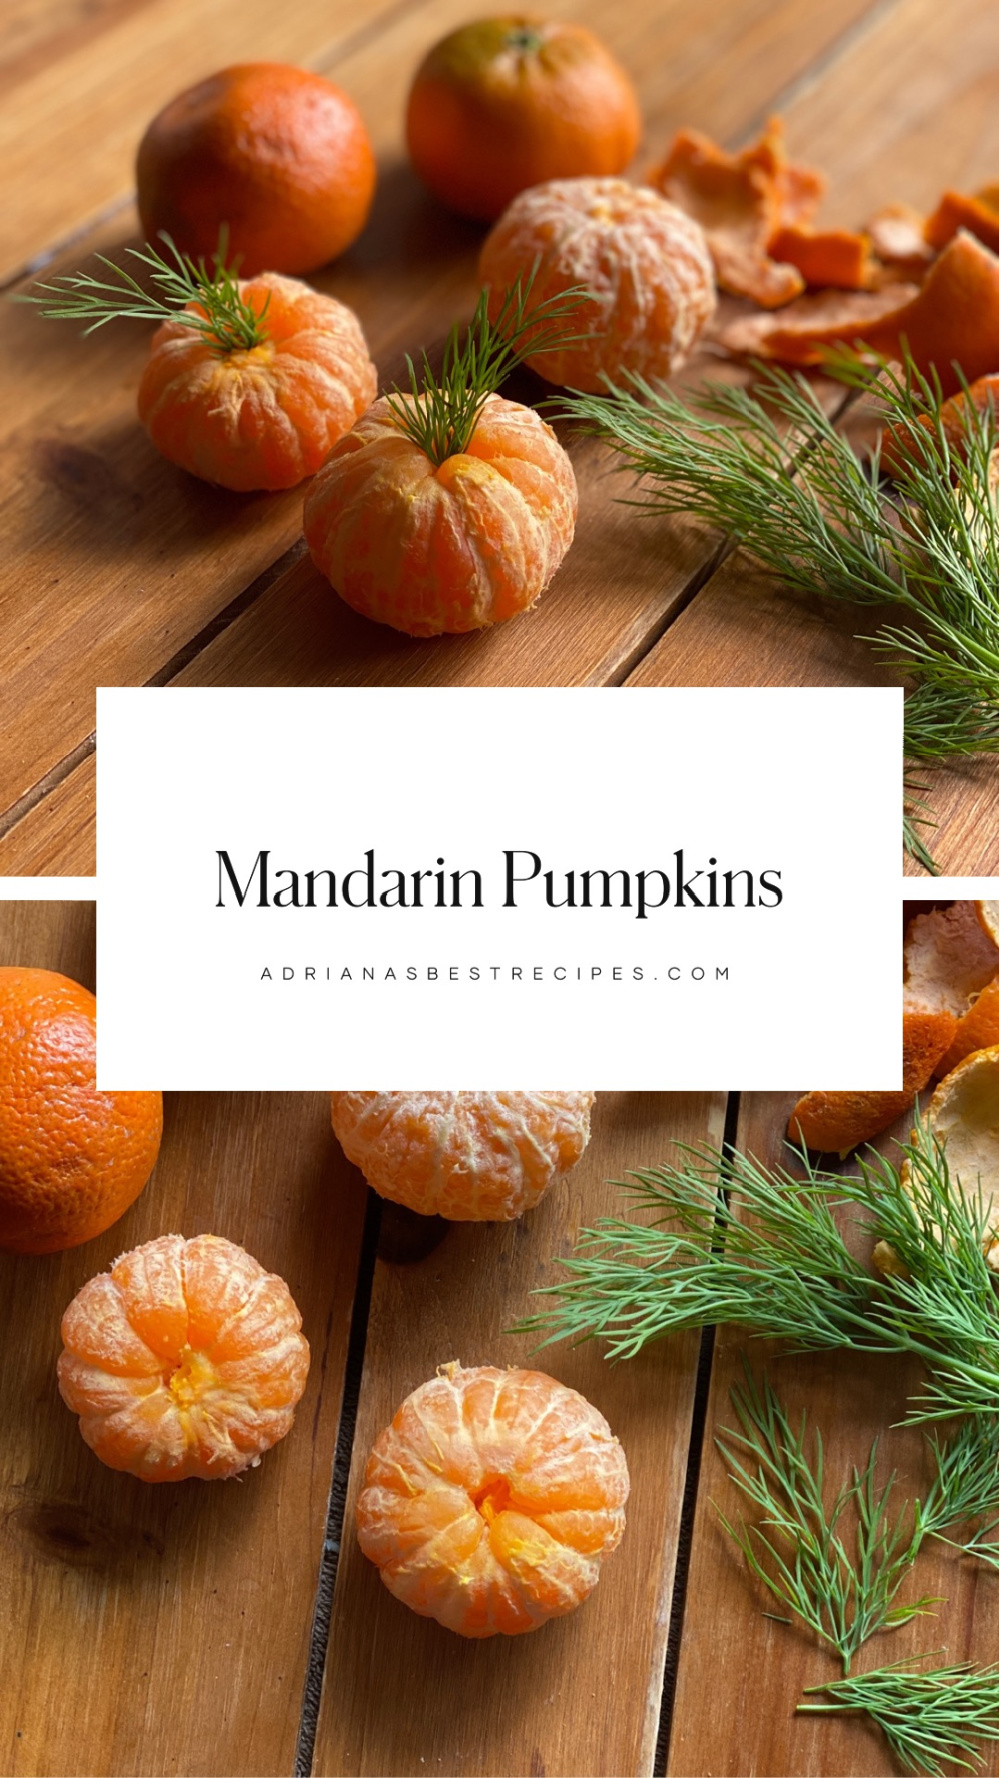 These are the Mandarin Pumpkins using herbs resulting in easy party bites